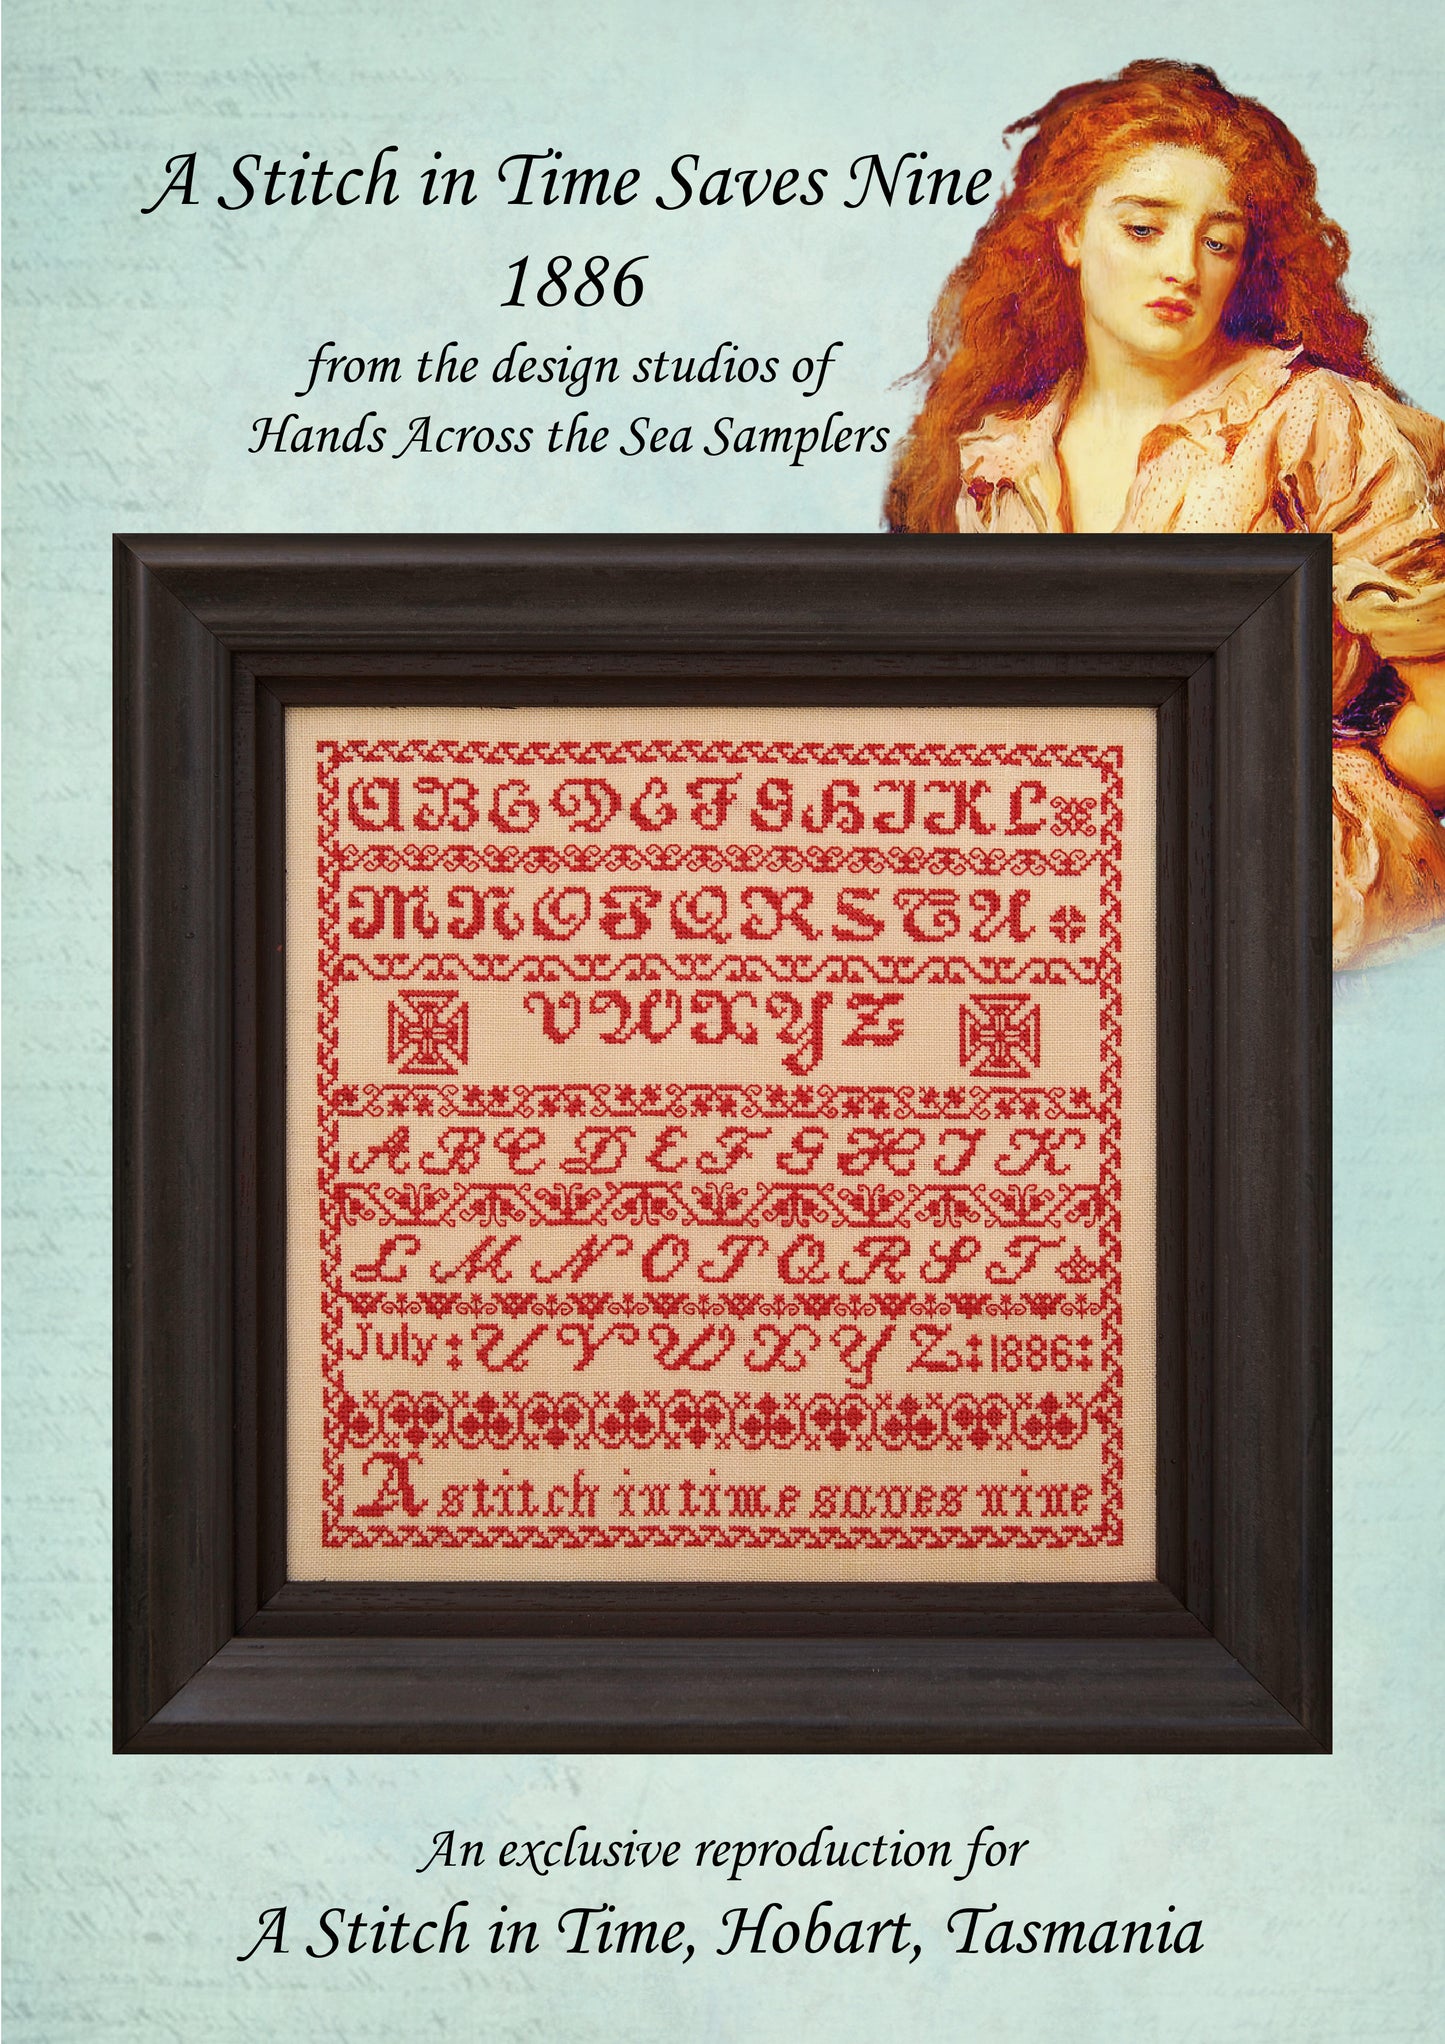 A Stitch in Time Saves Nine - Exclusive Reproduction Sampler Chart by Hands Across the Sea Samplers